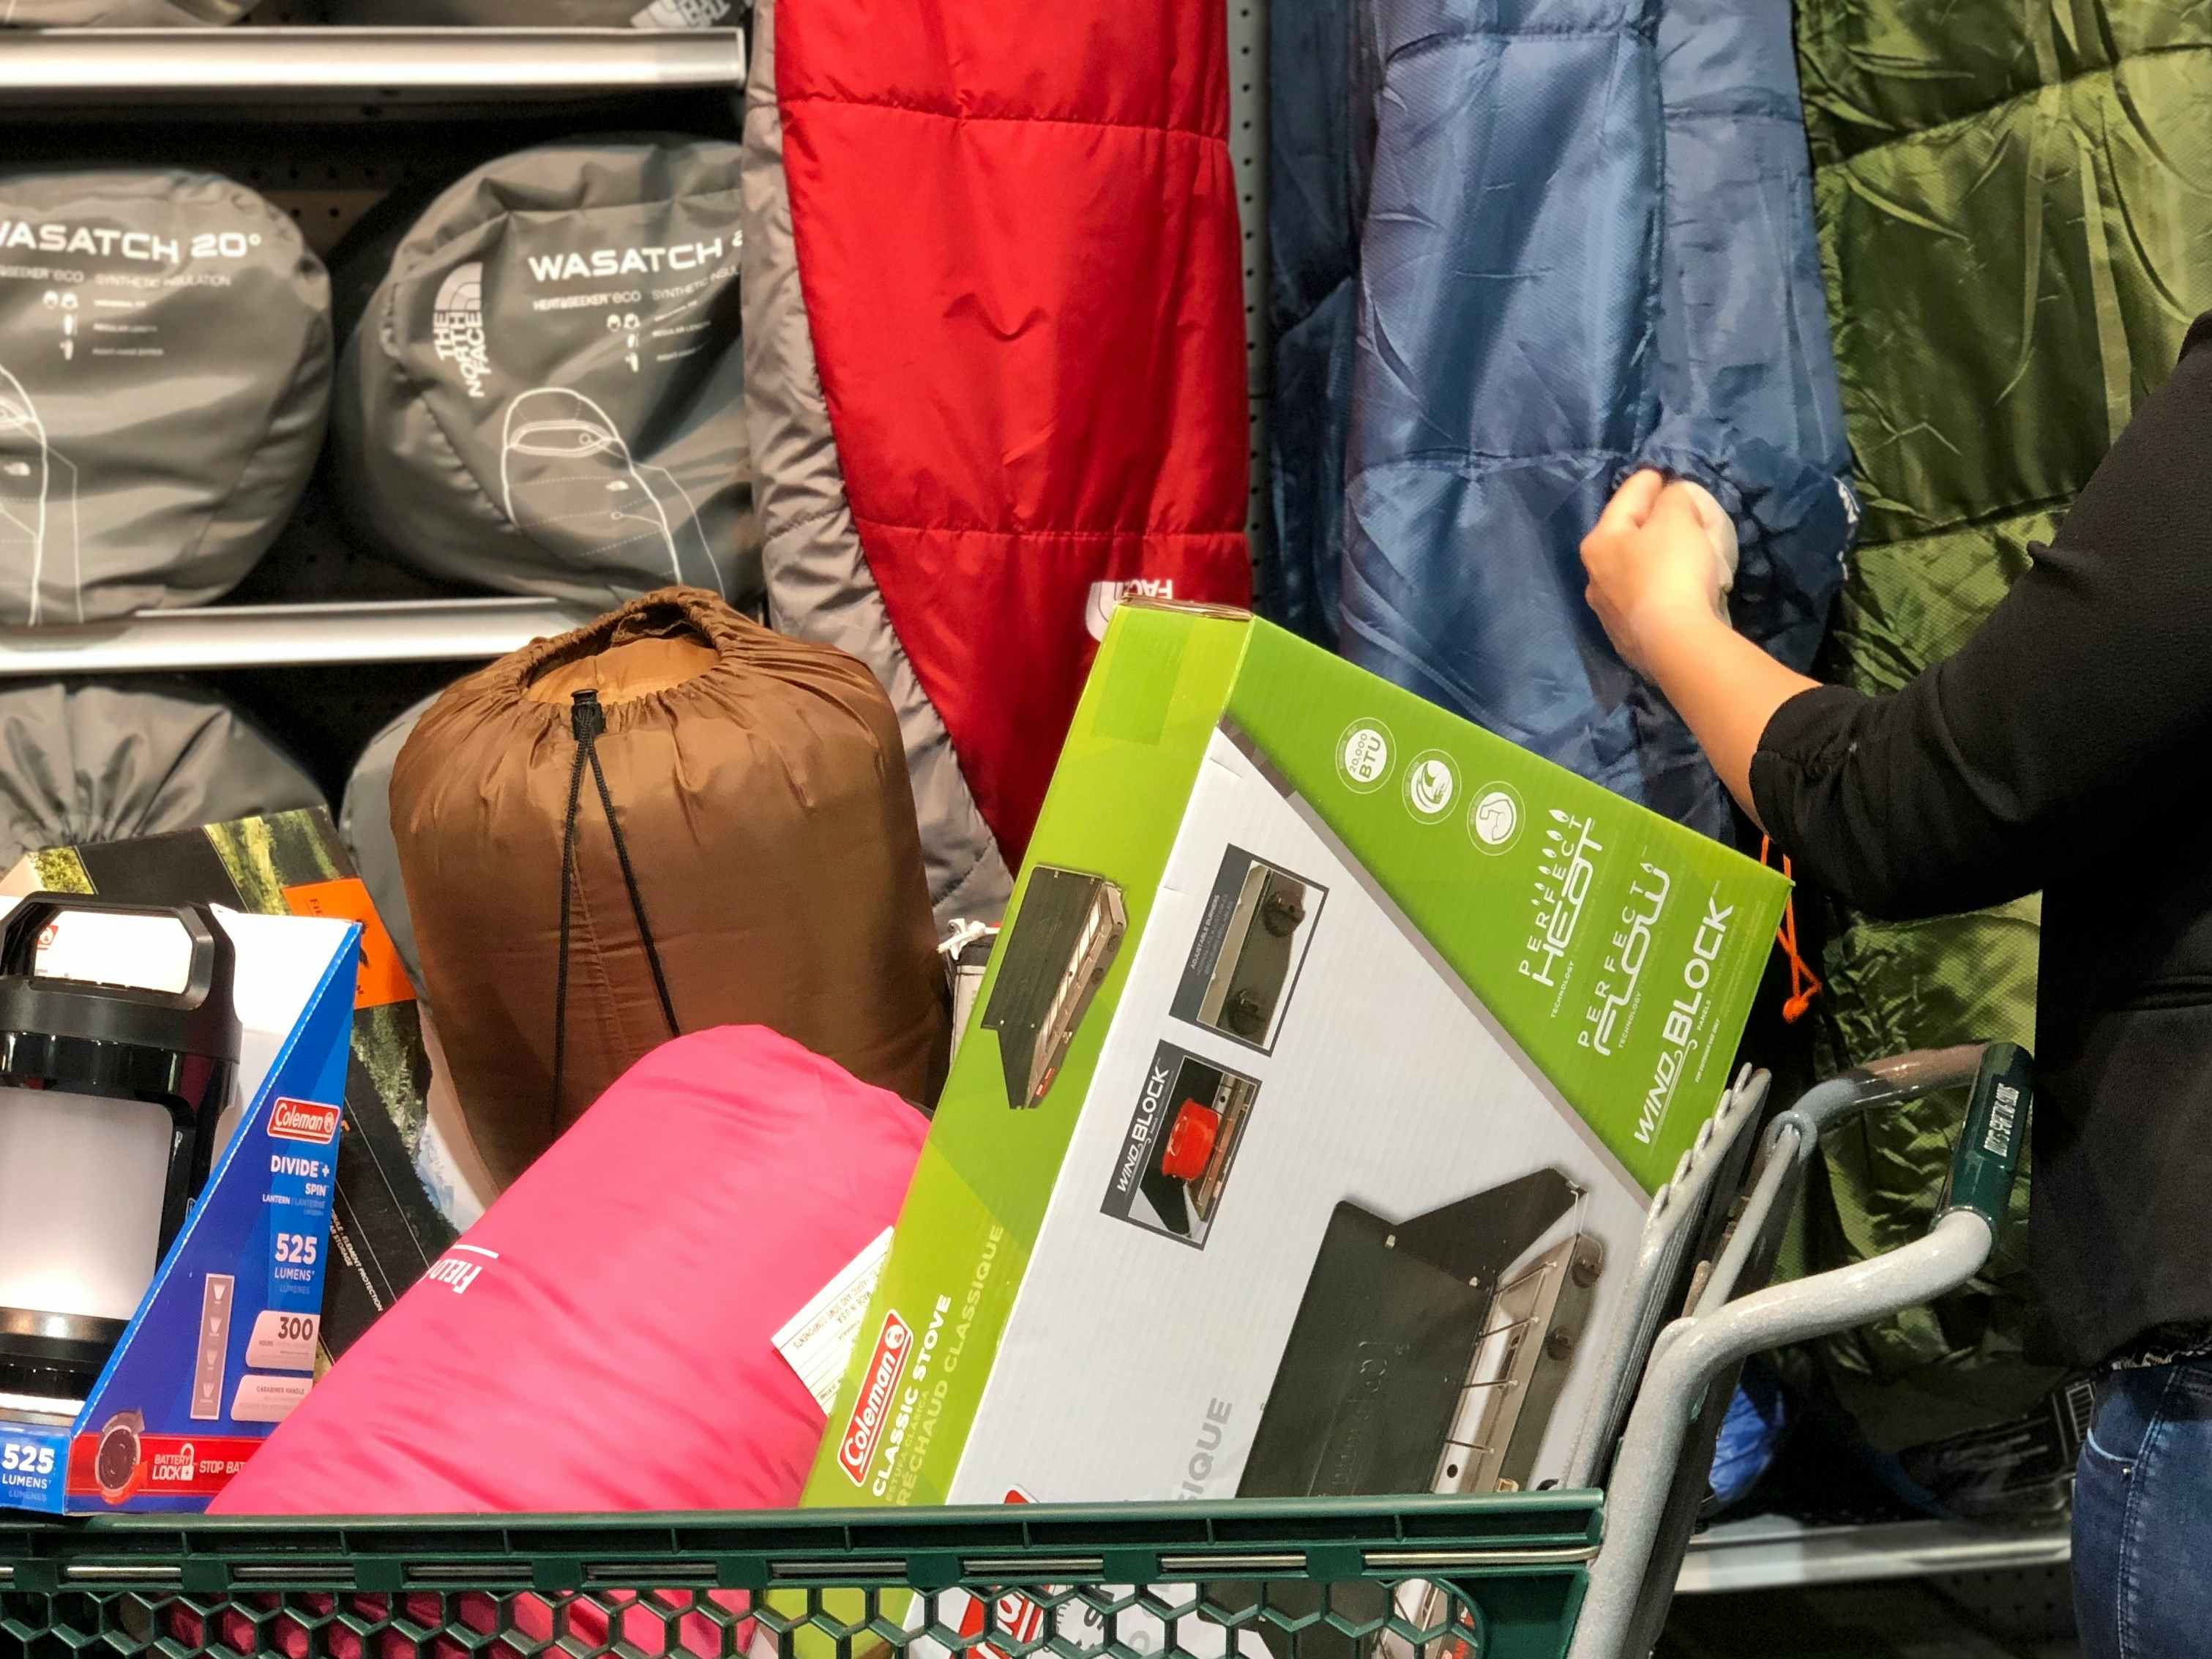 A person looking through sleeping bags next to a shopping cart filled with camping gear including an air mattress and sleeping bags.